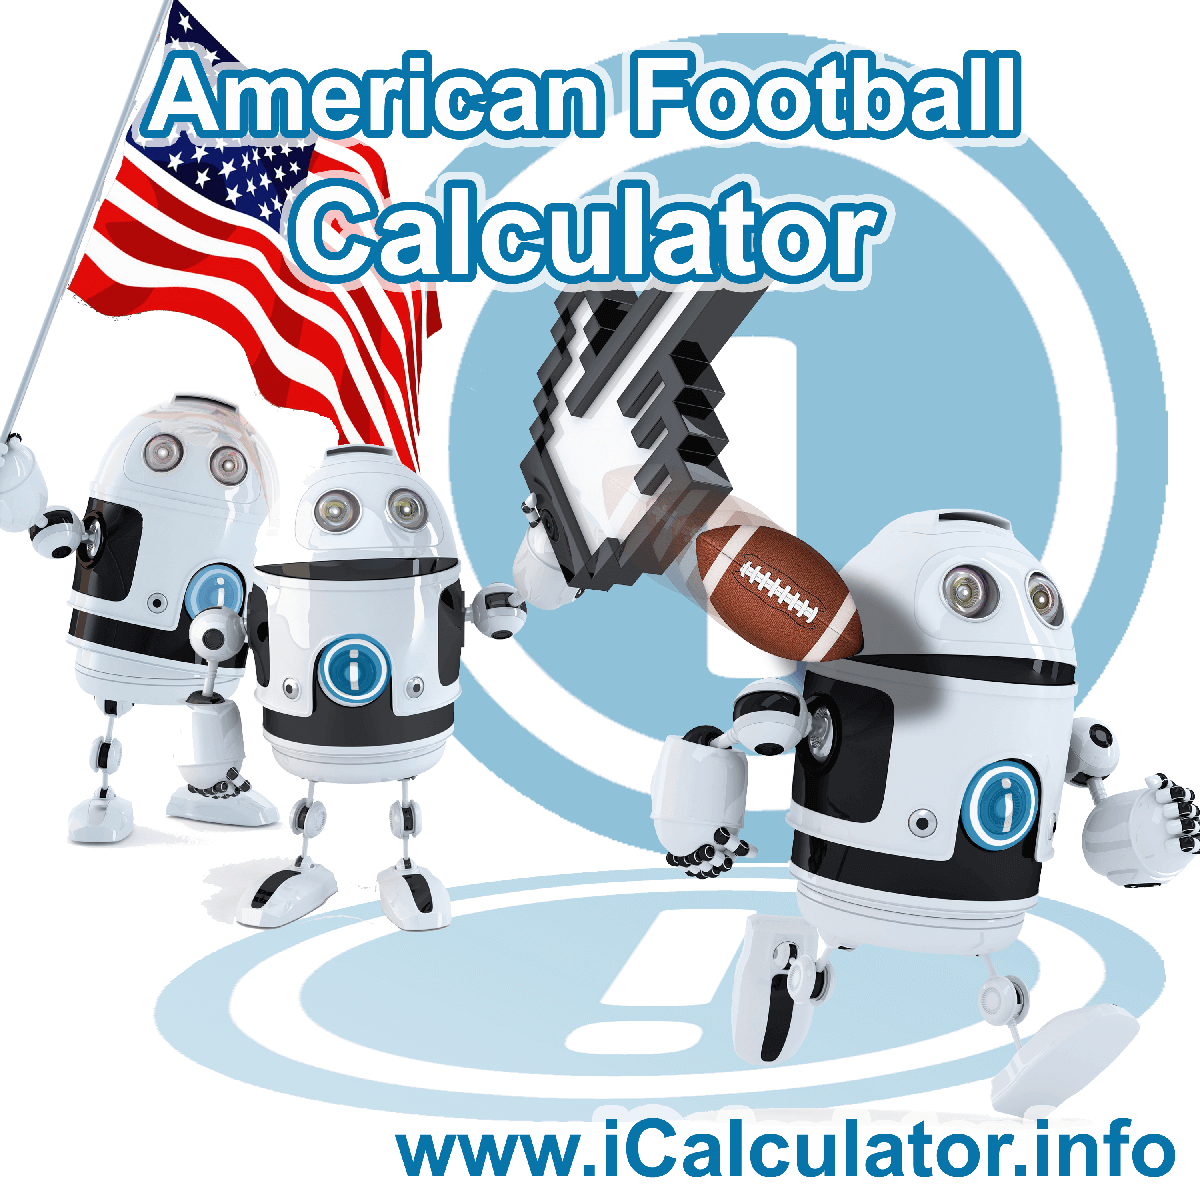 American Football Calculator. This image shows an American Football player playing american football - by iCalculator